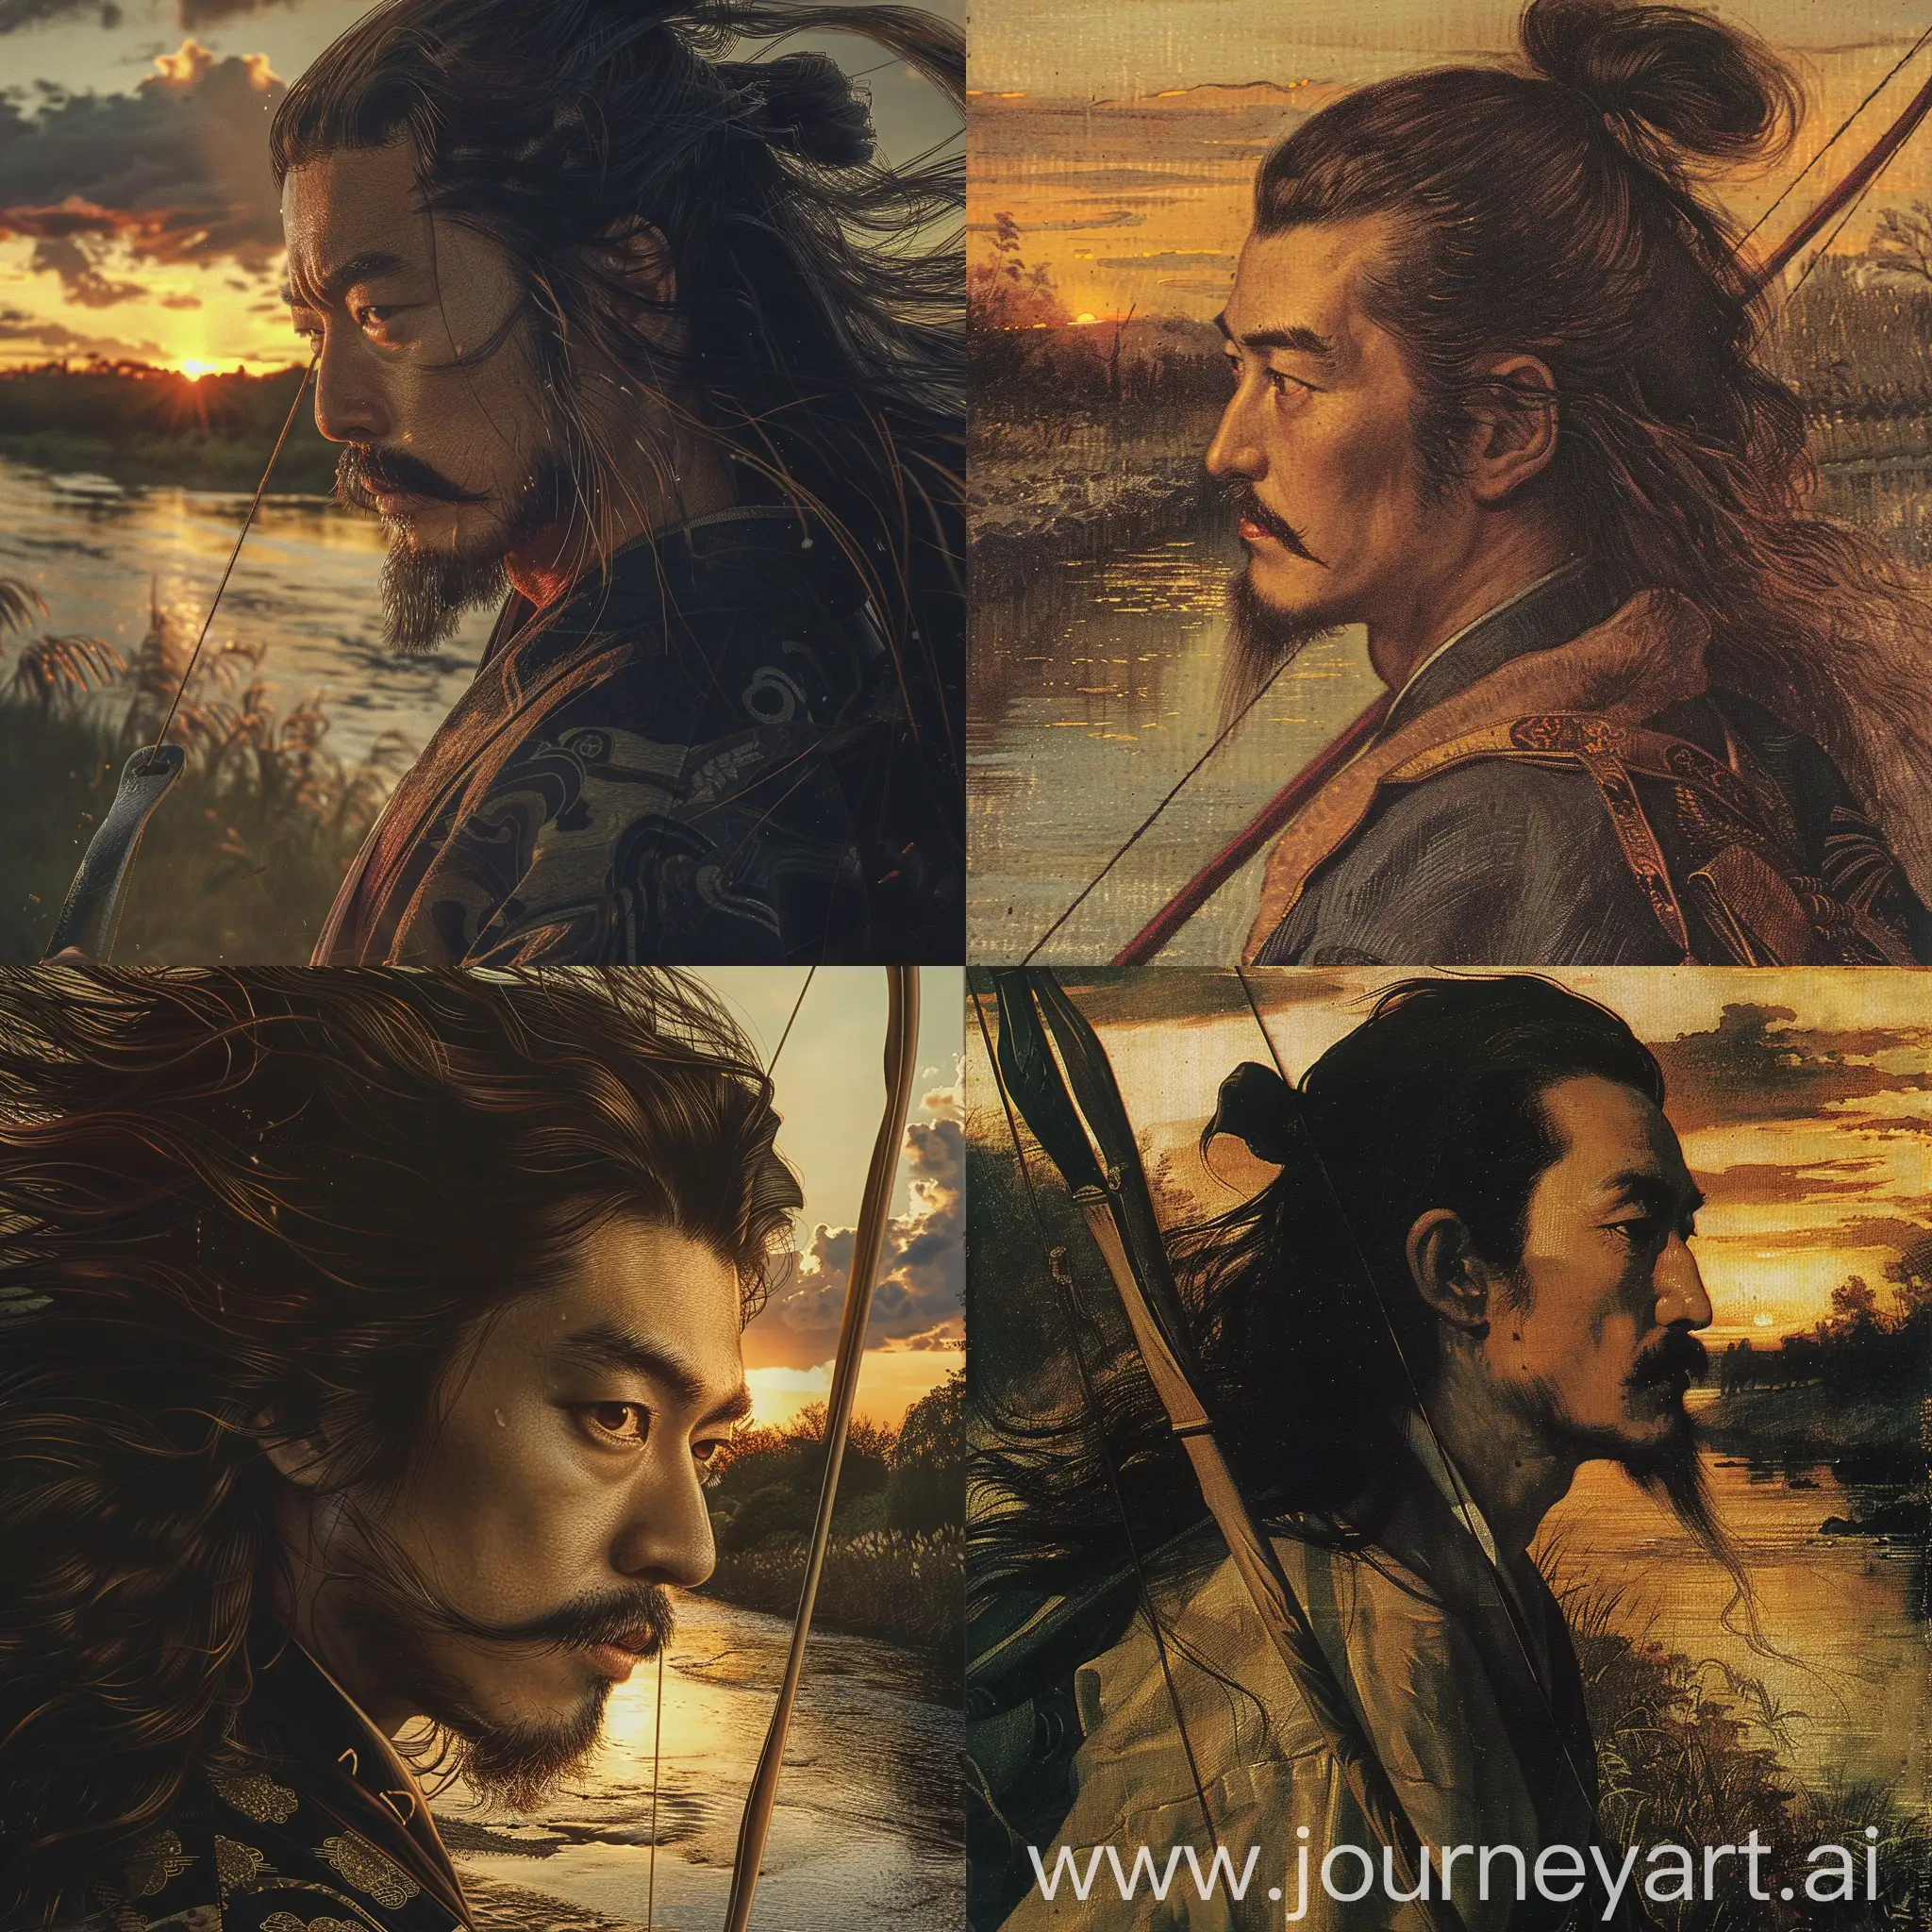 First Japanese Emperor Jimmu, long hair, japanese style mustache and goatee beard, side pose, close up, near a river, sunset, has a long composite bow in his hand, caravaggio style